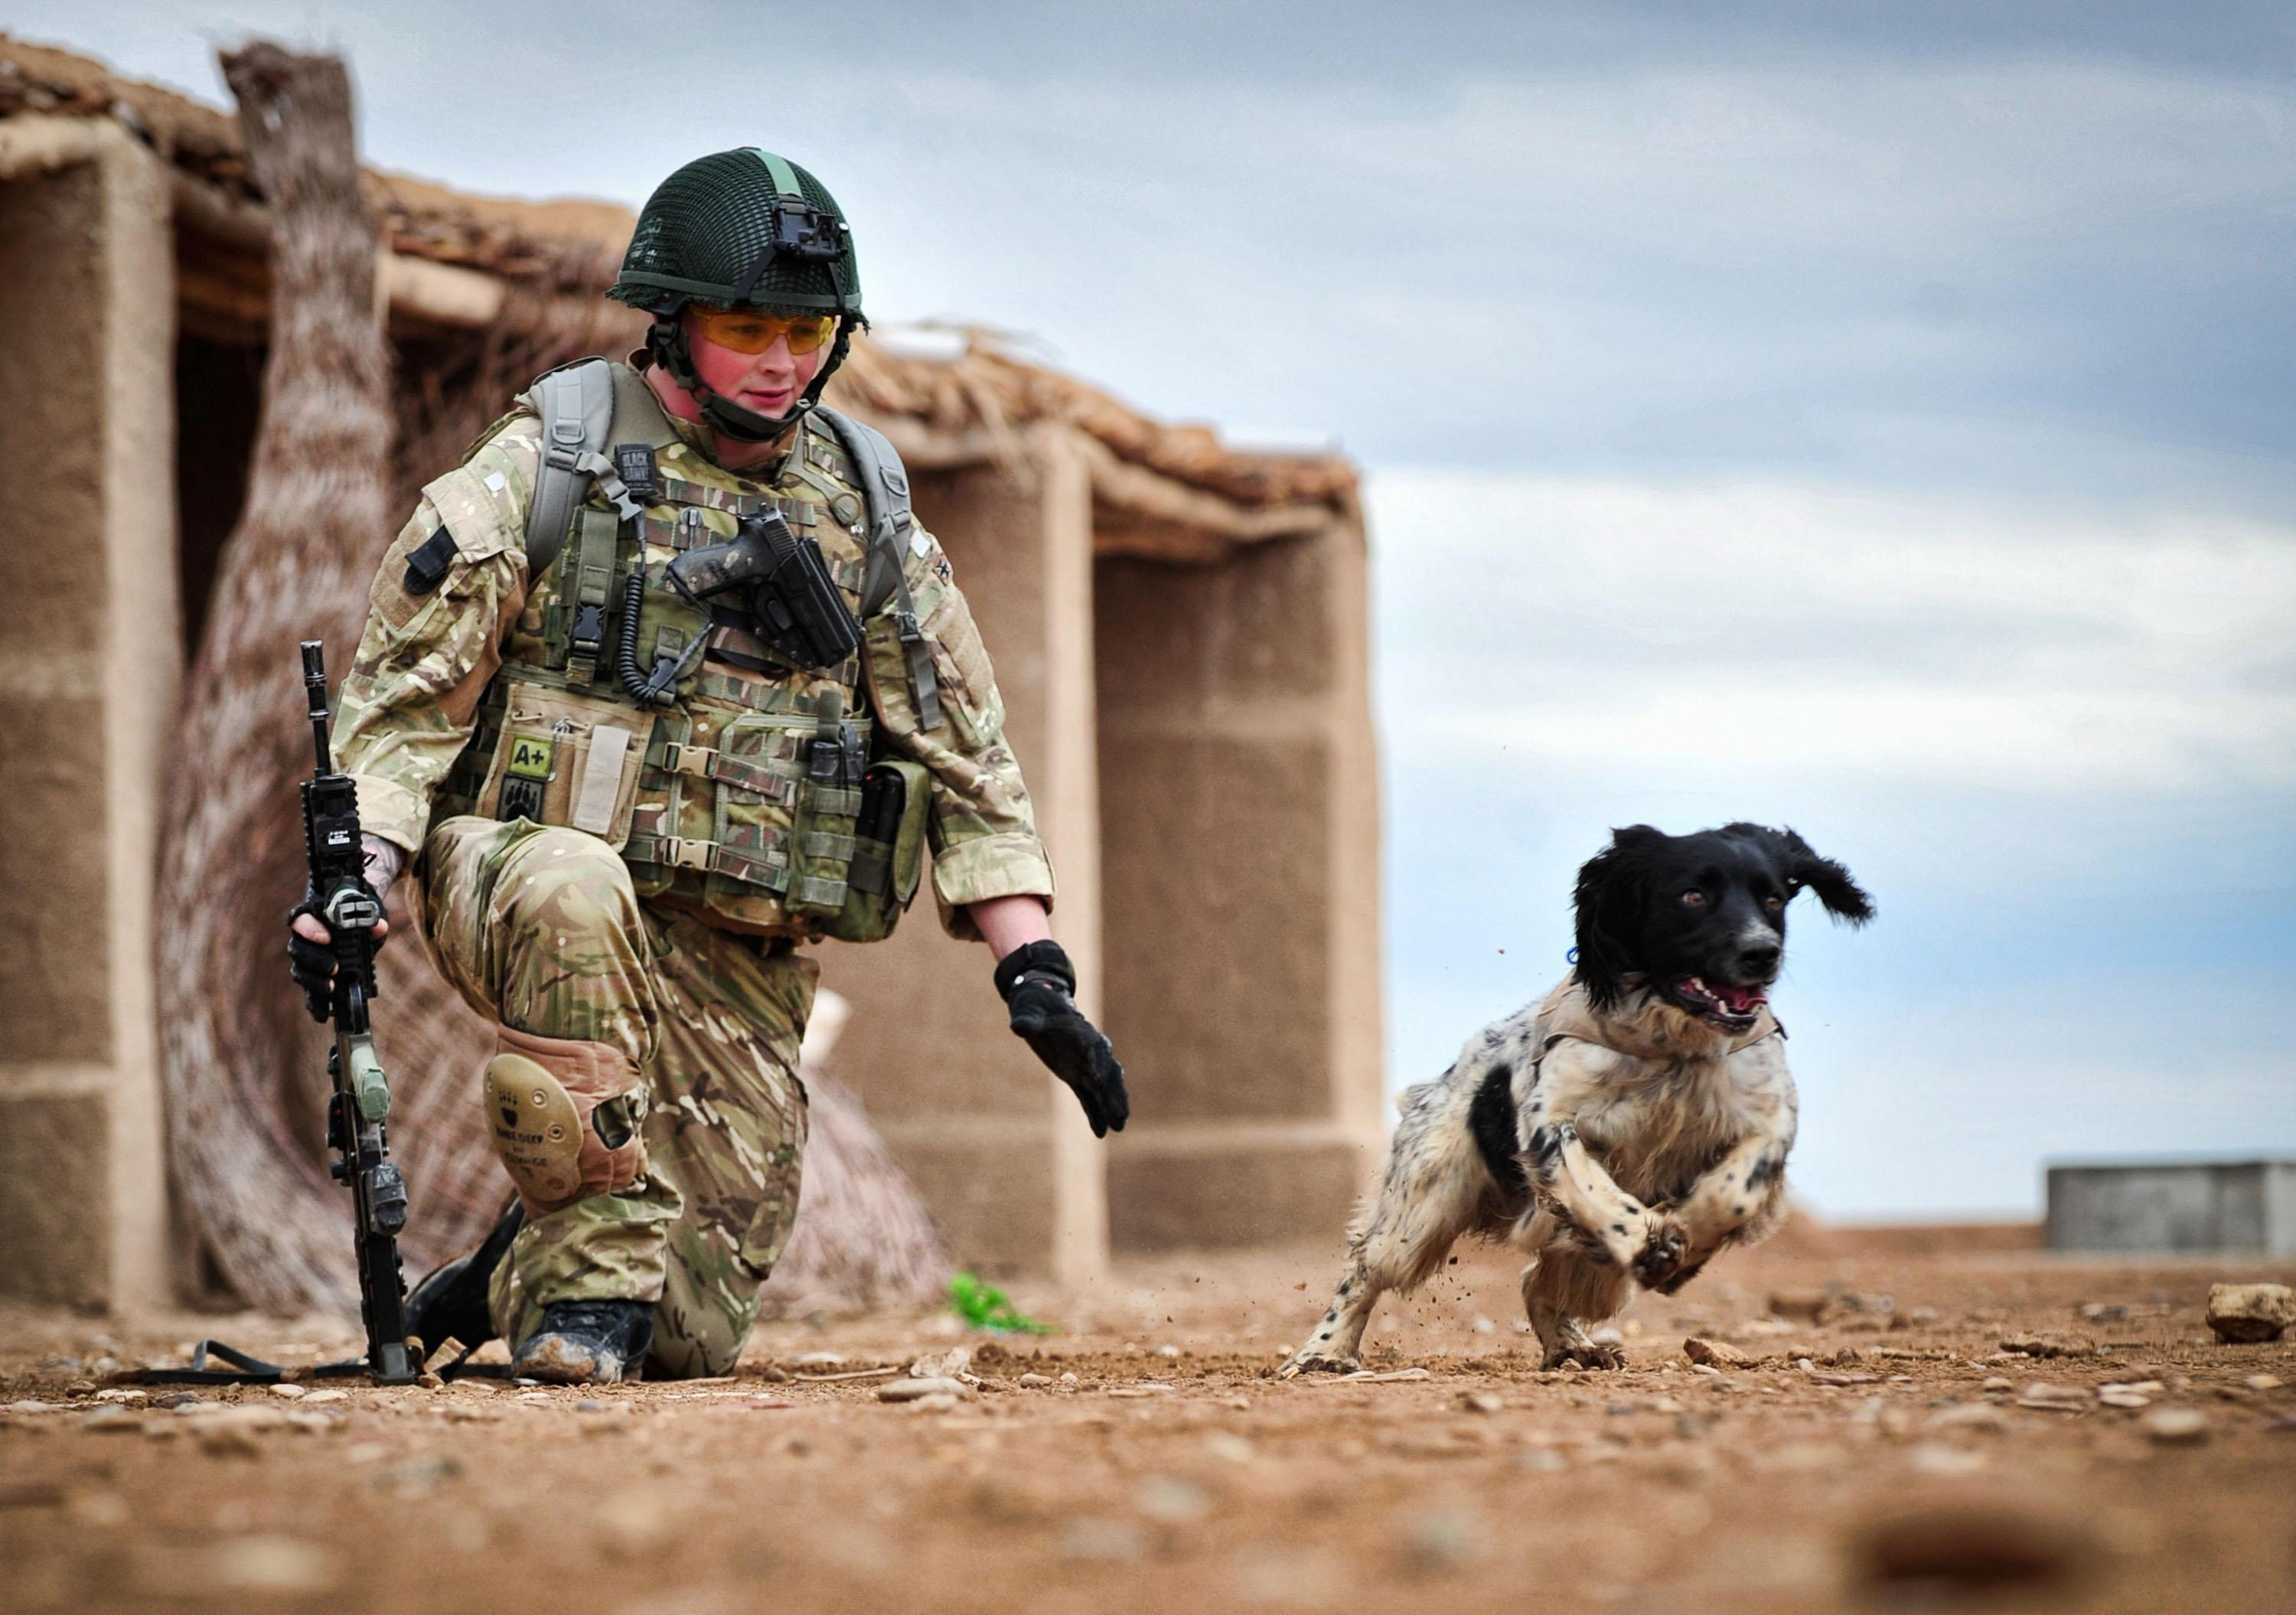 Fife soldier Lance Corporal Liam Tasker and his dog Theo